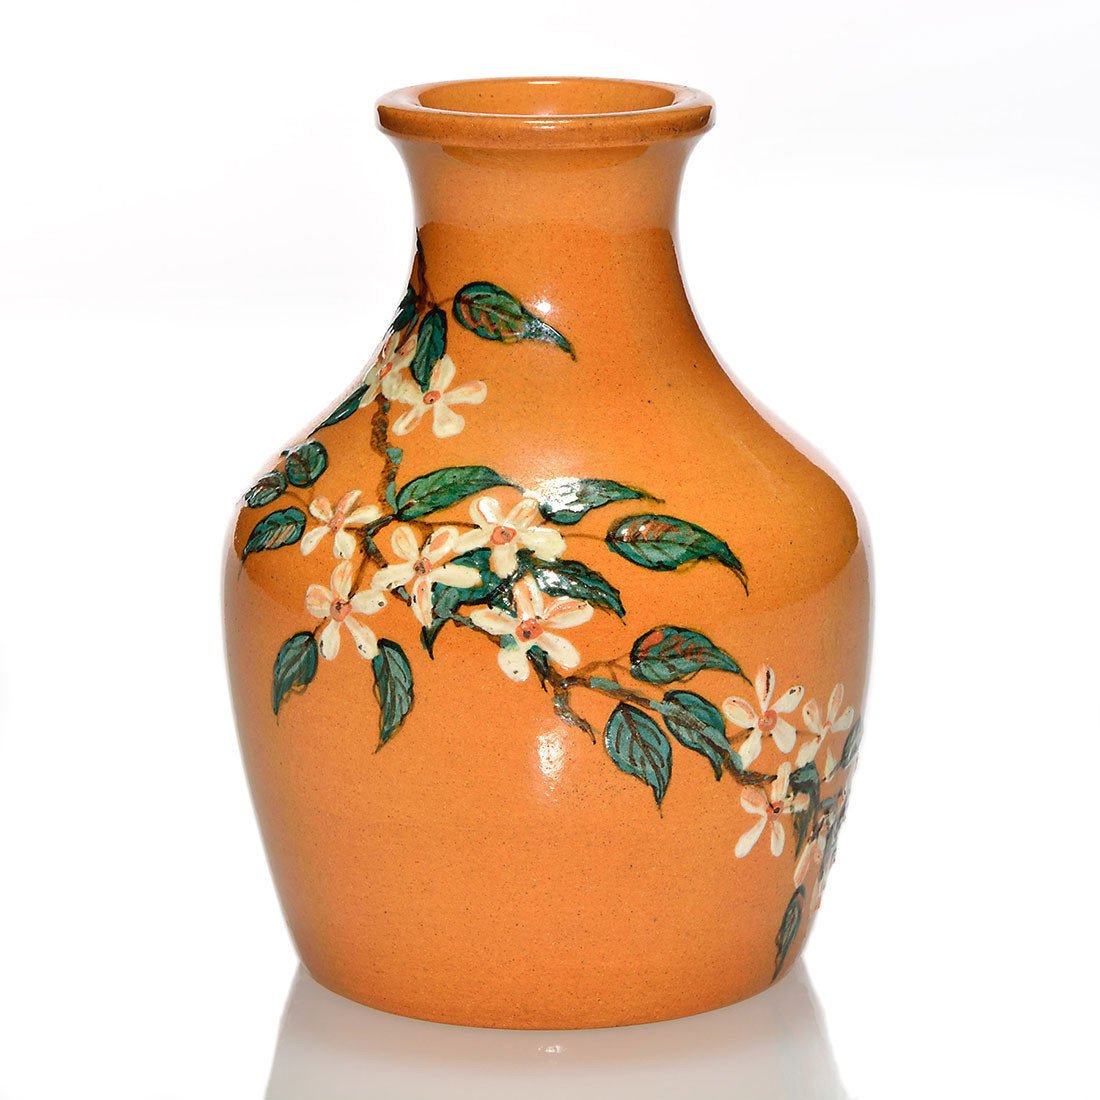 27 Awesome Limoges Vase Prices 2024 free download limoges vase prices of humler nolan prices realized throughout 1240 matt morgan limoges vase colorful flowers o s mcc 5 1 4 read more